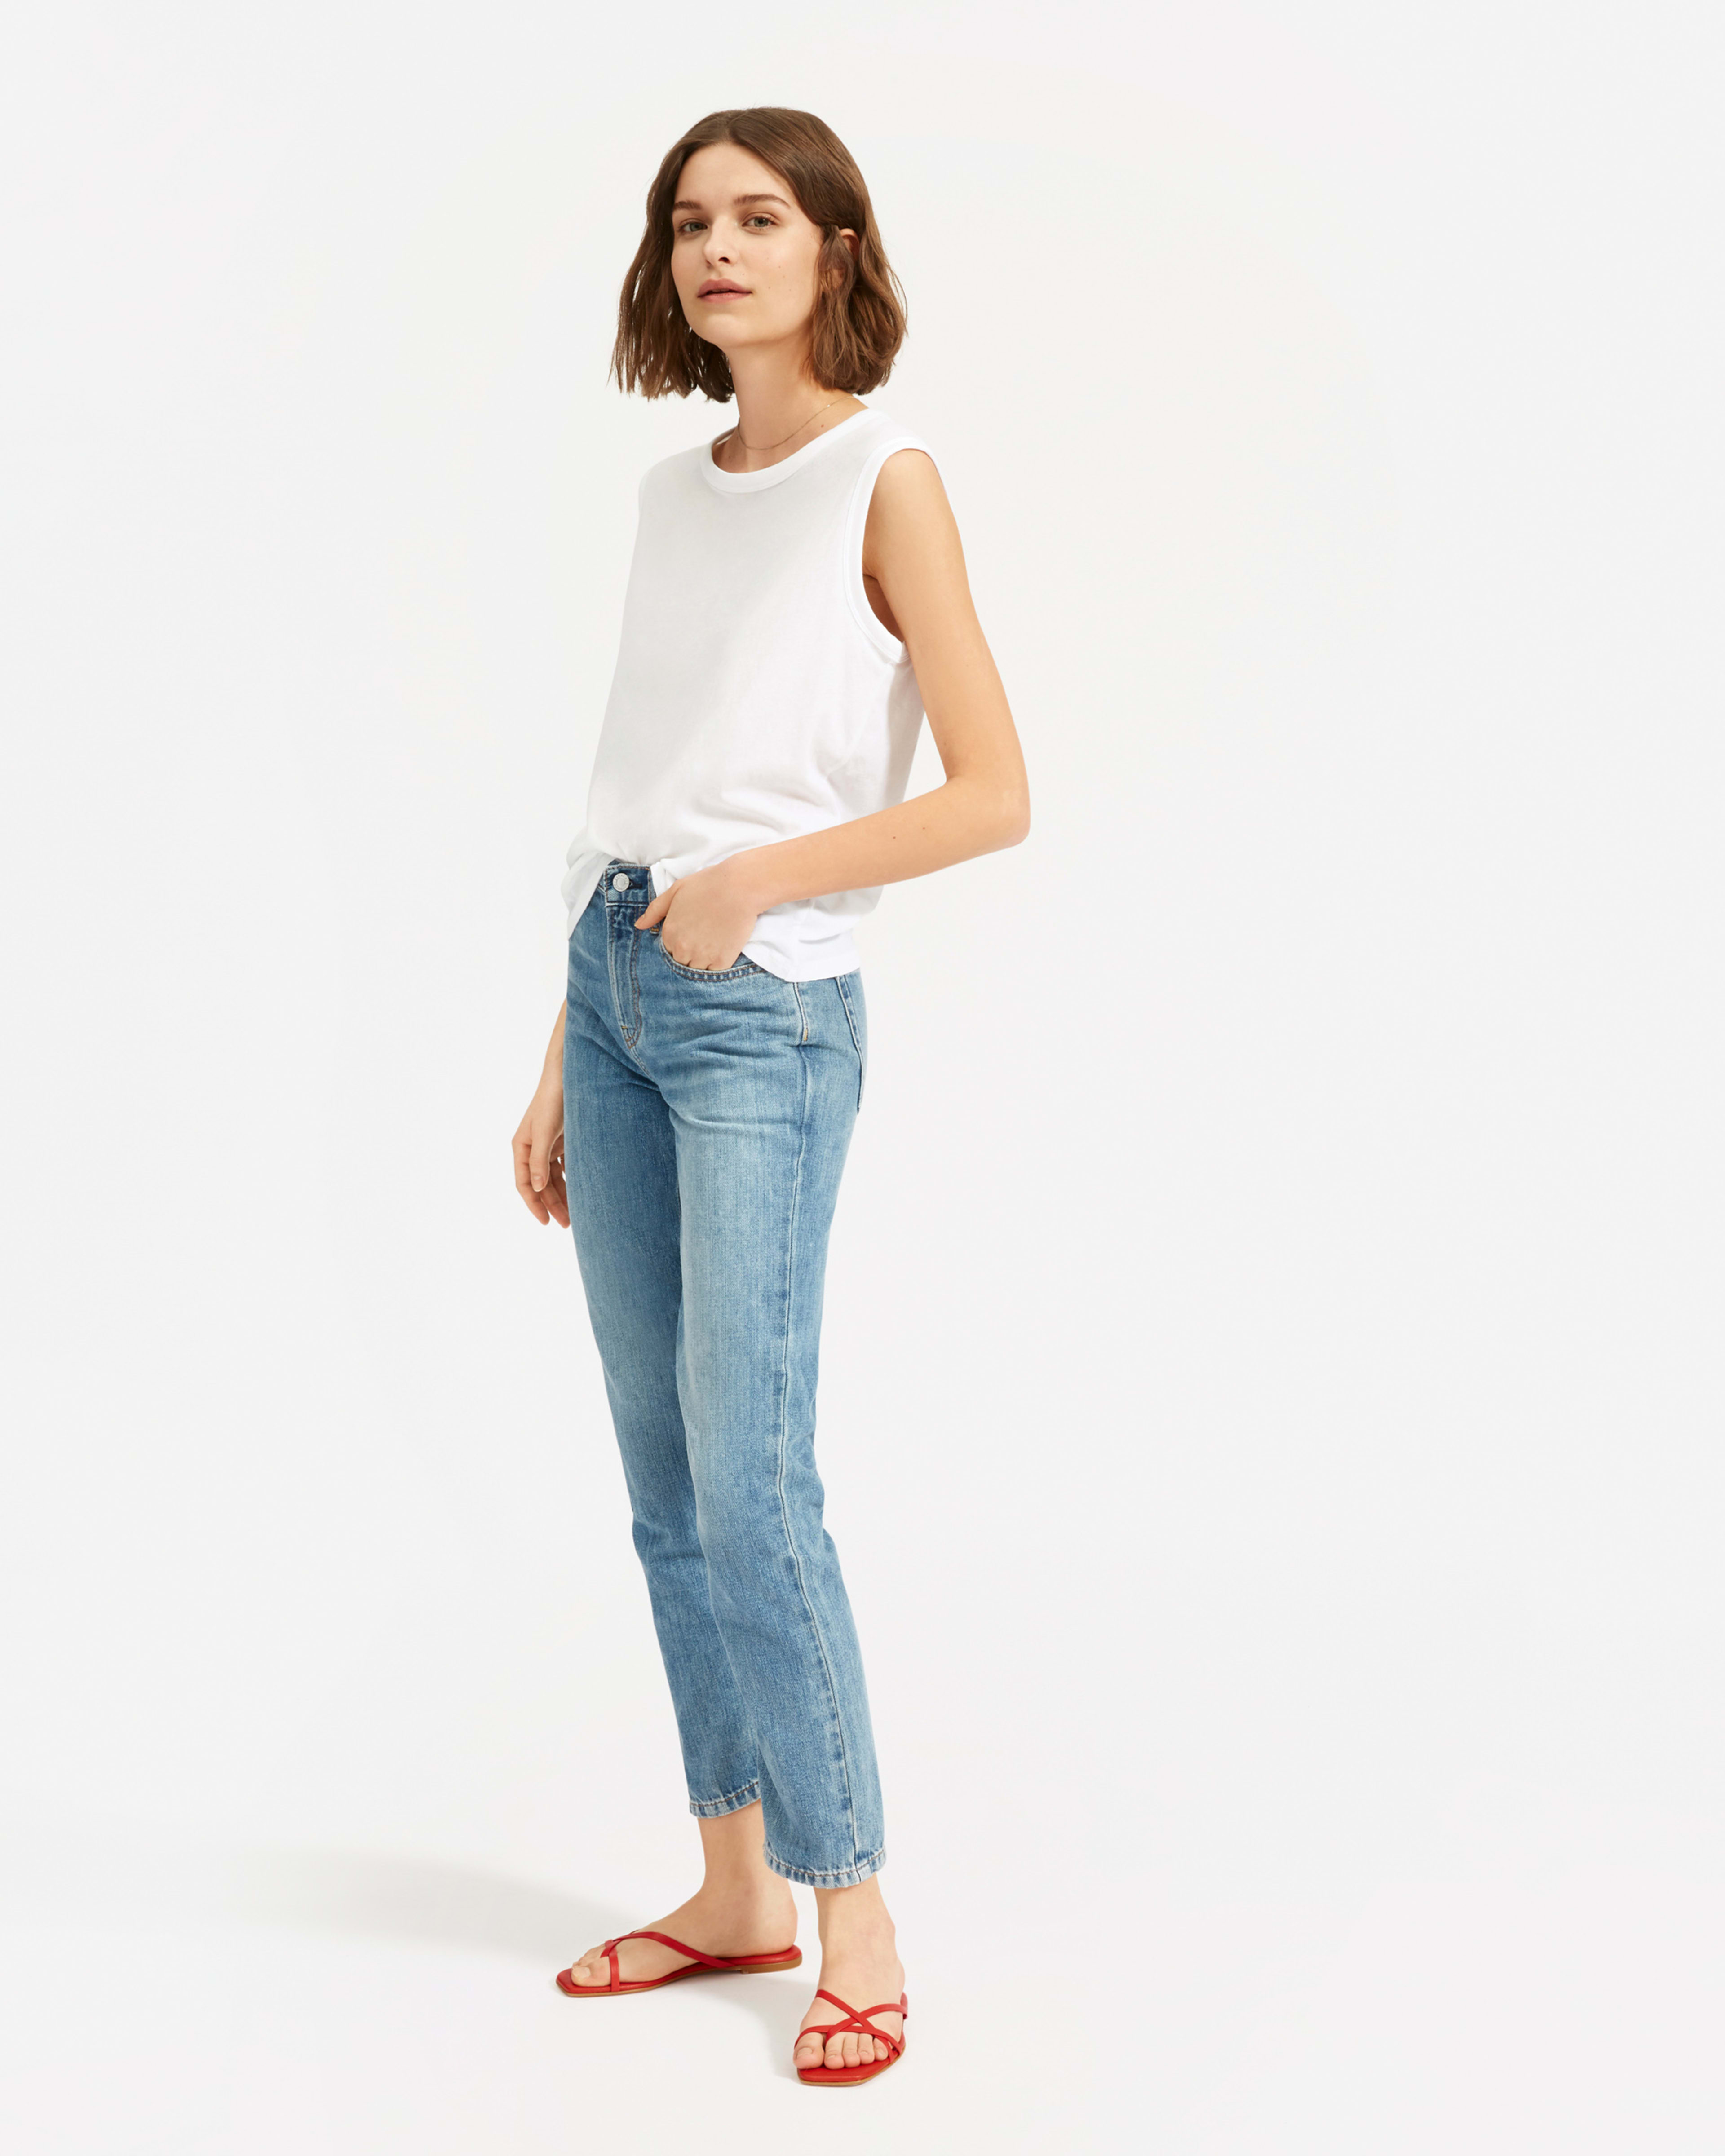 The Air Muscle Tank White – Everlane